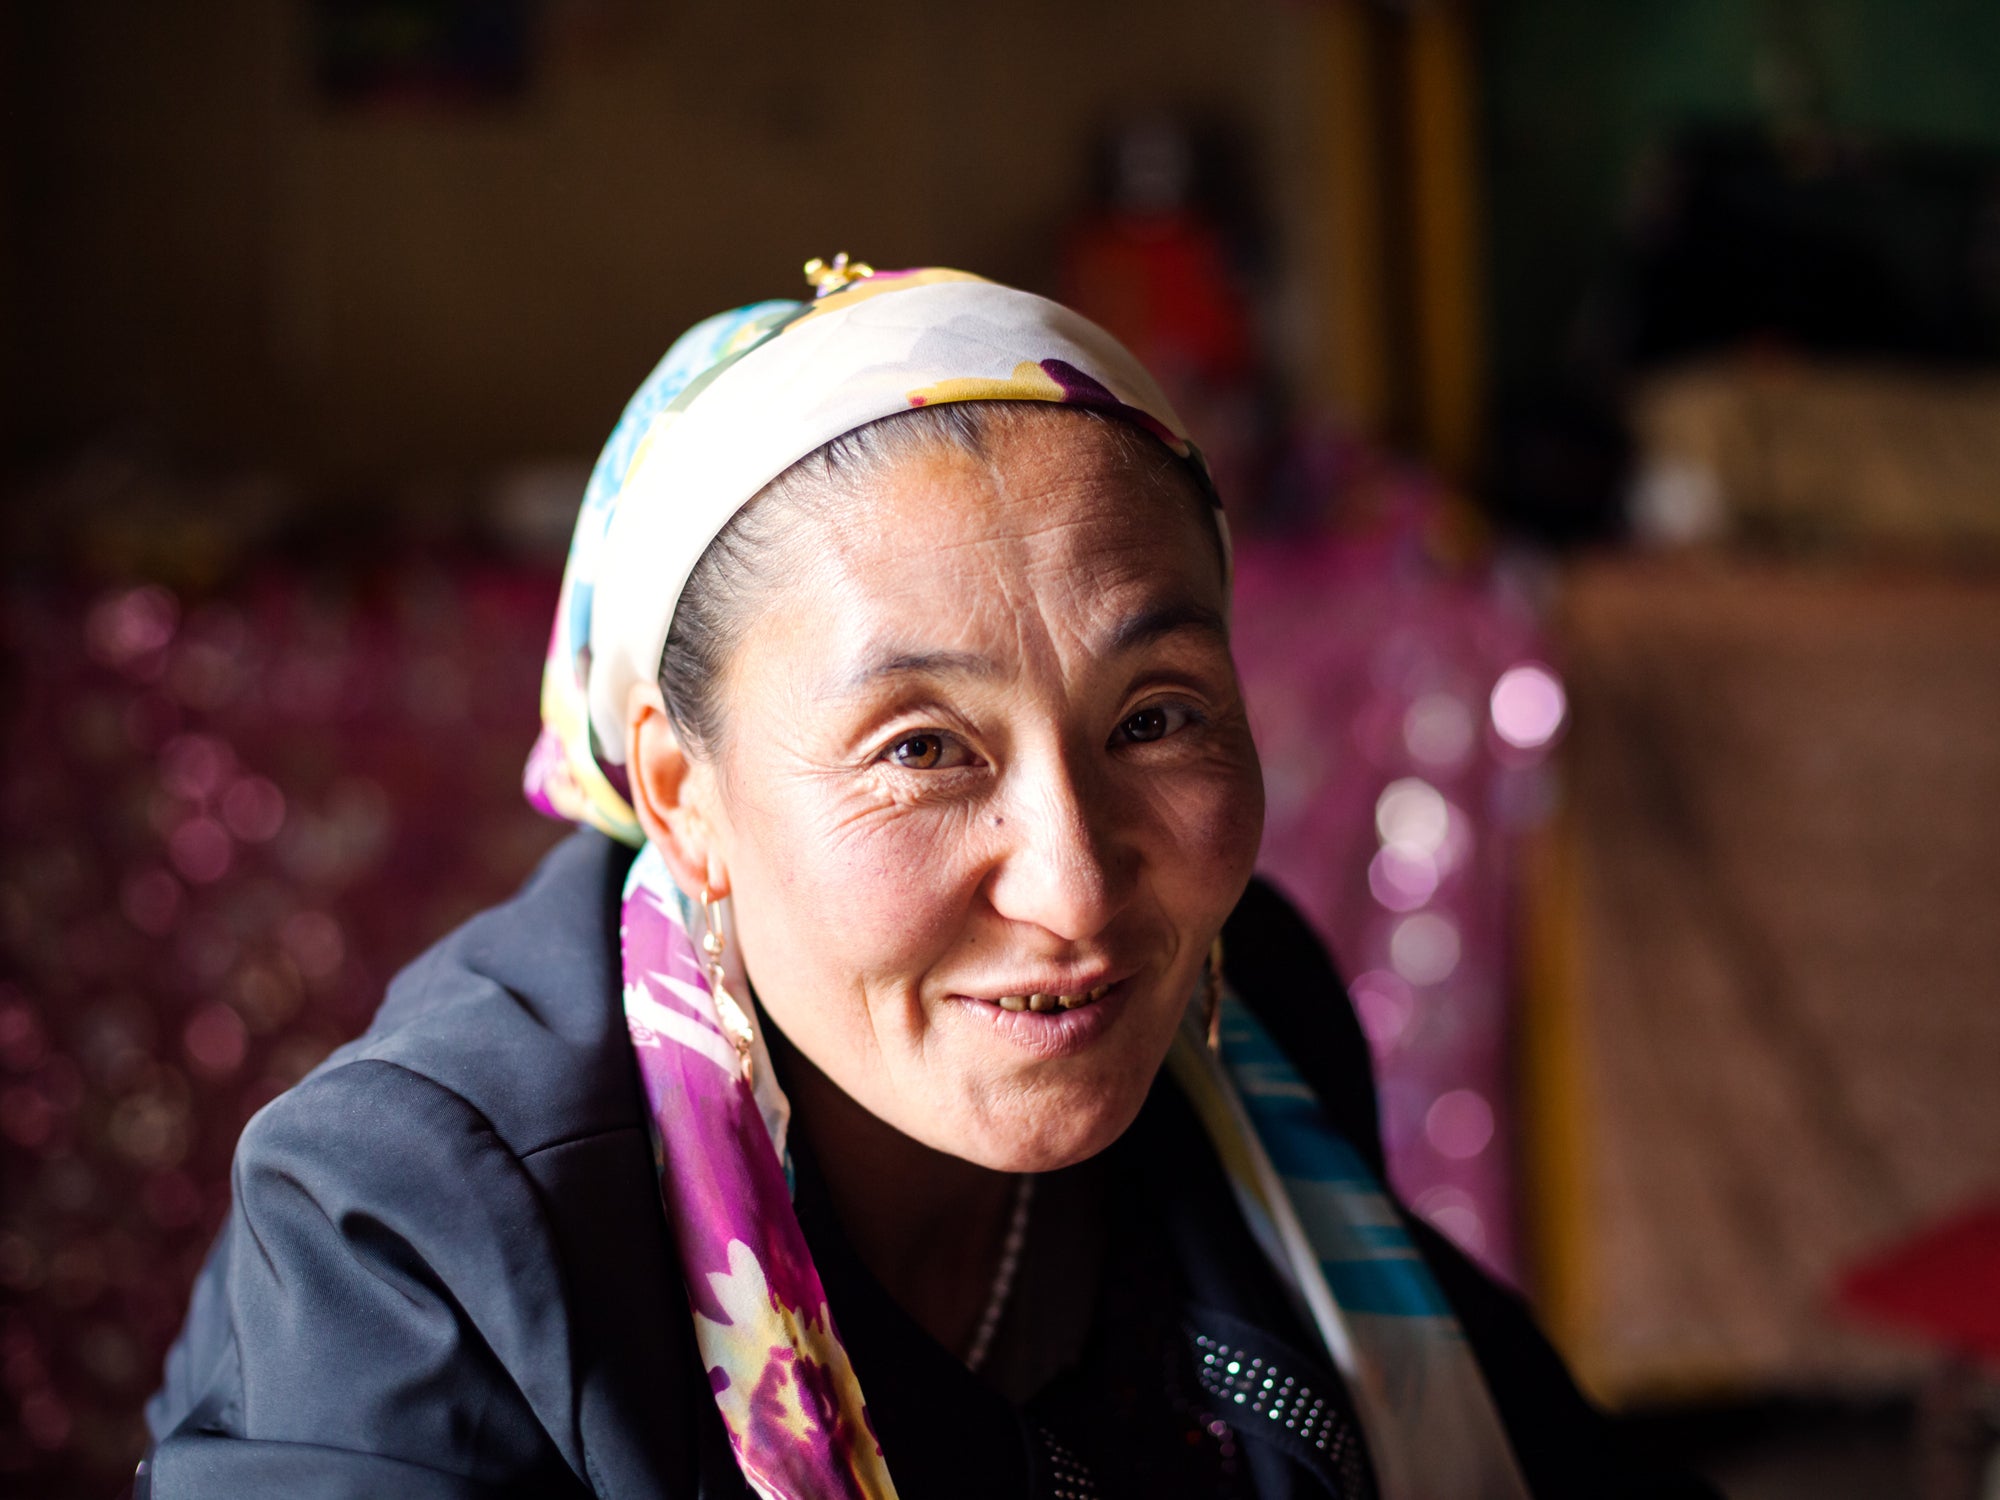 Xinjiang, China: Portrait of a kyrgyz ethnic minority woman. Protected by human rights due diligence.